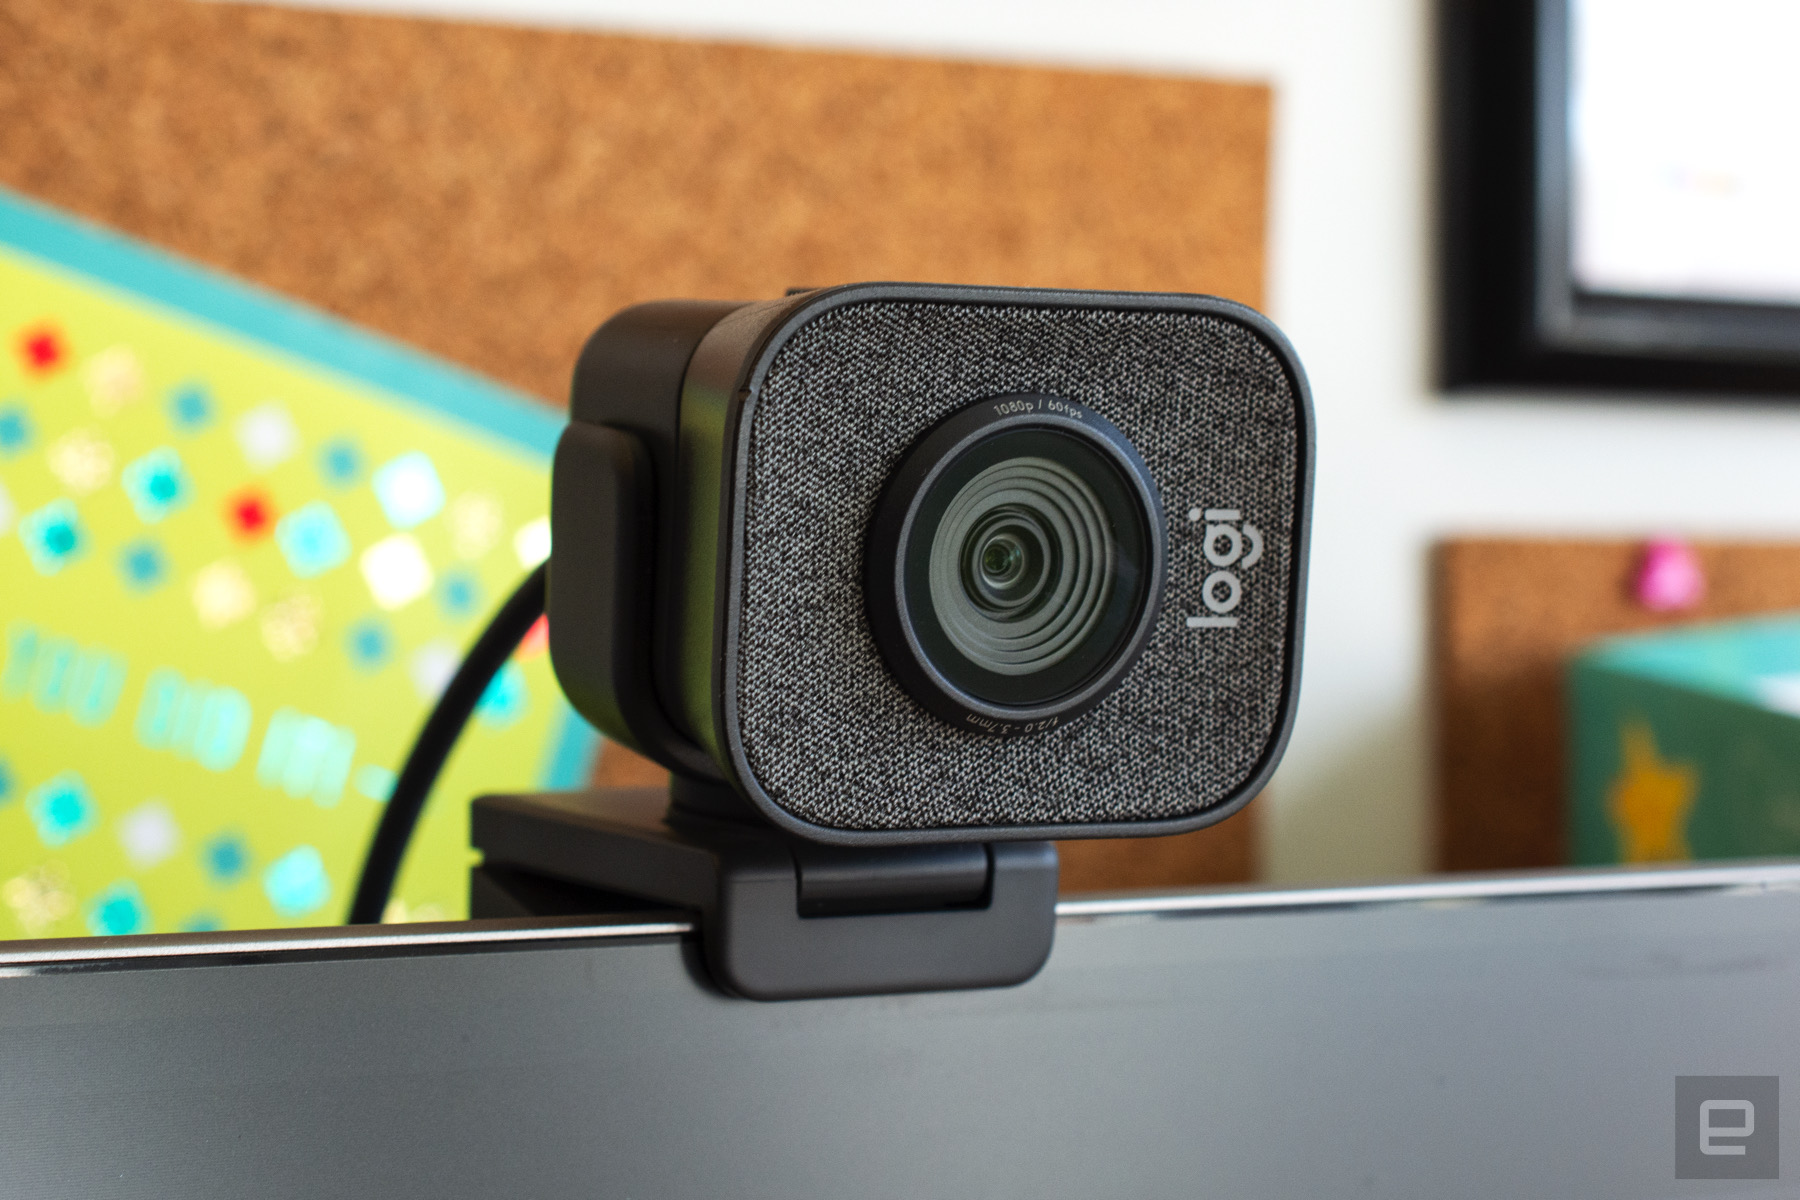 Logitech's StreamCam is just $100 at Amazon and Best Buy